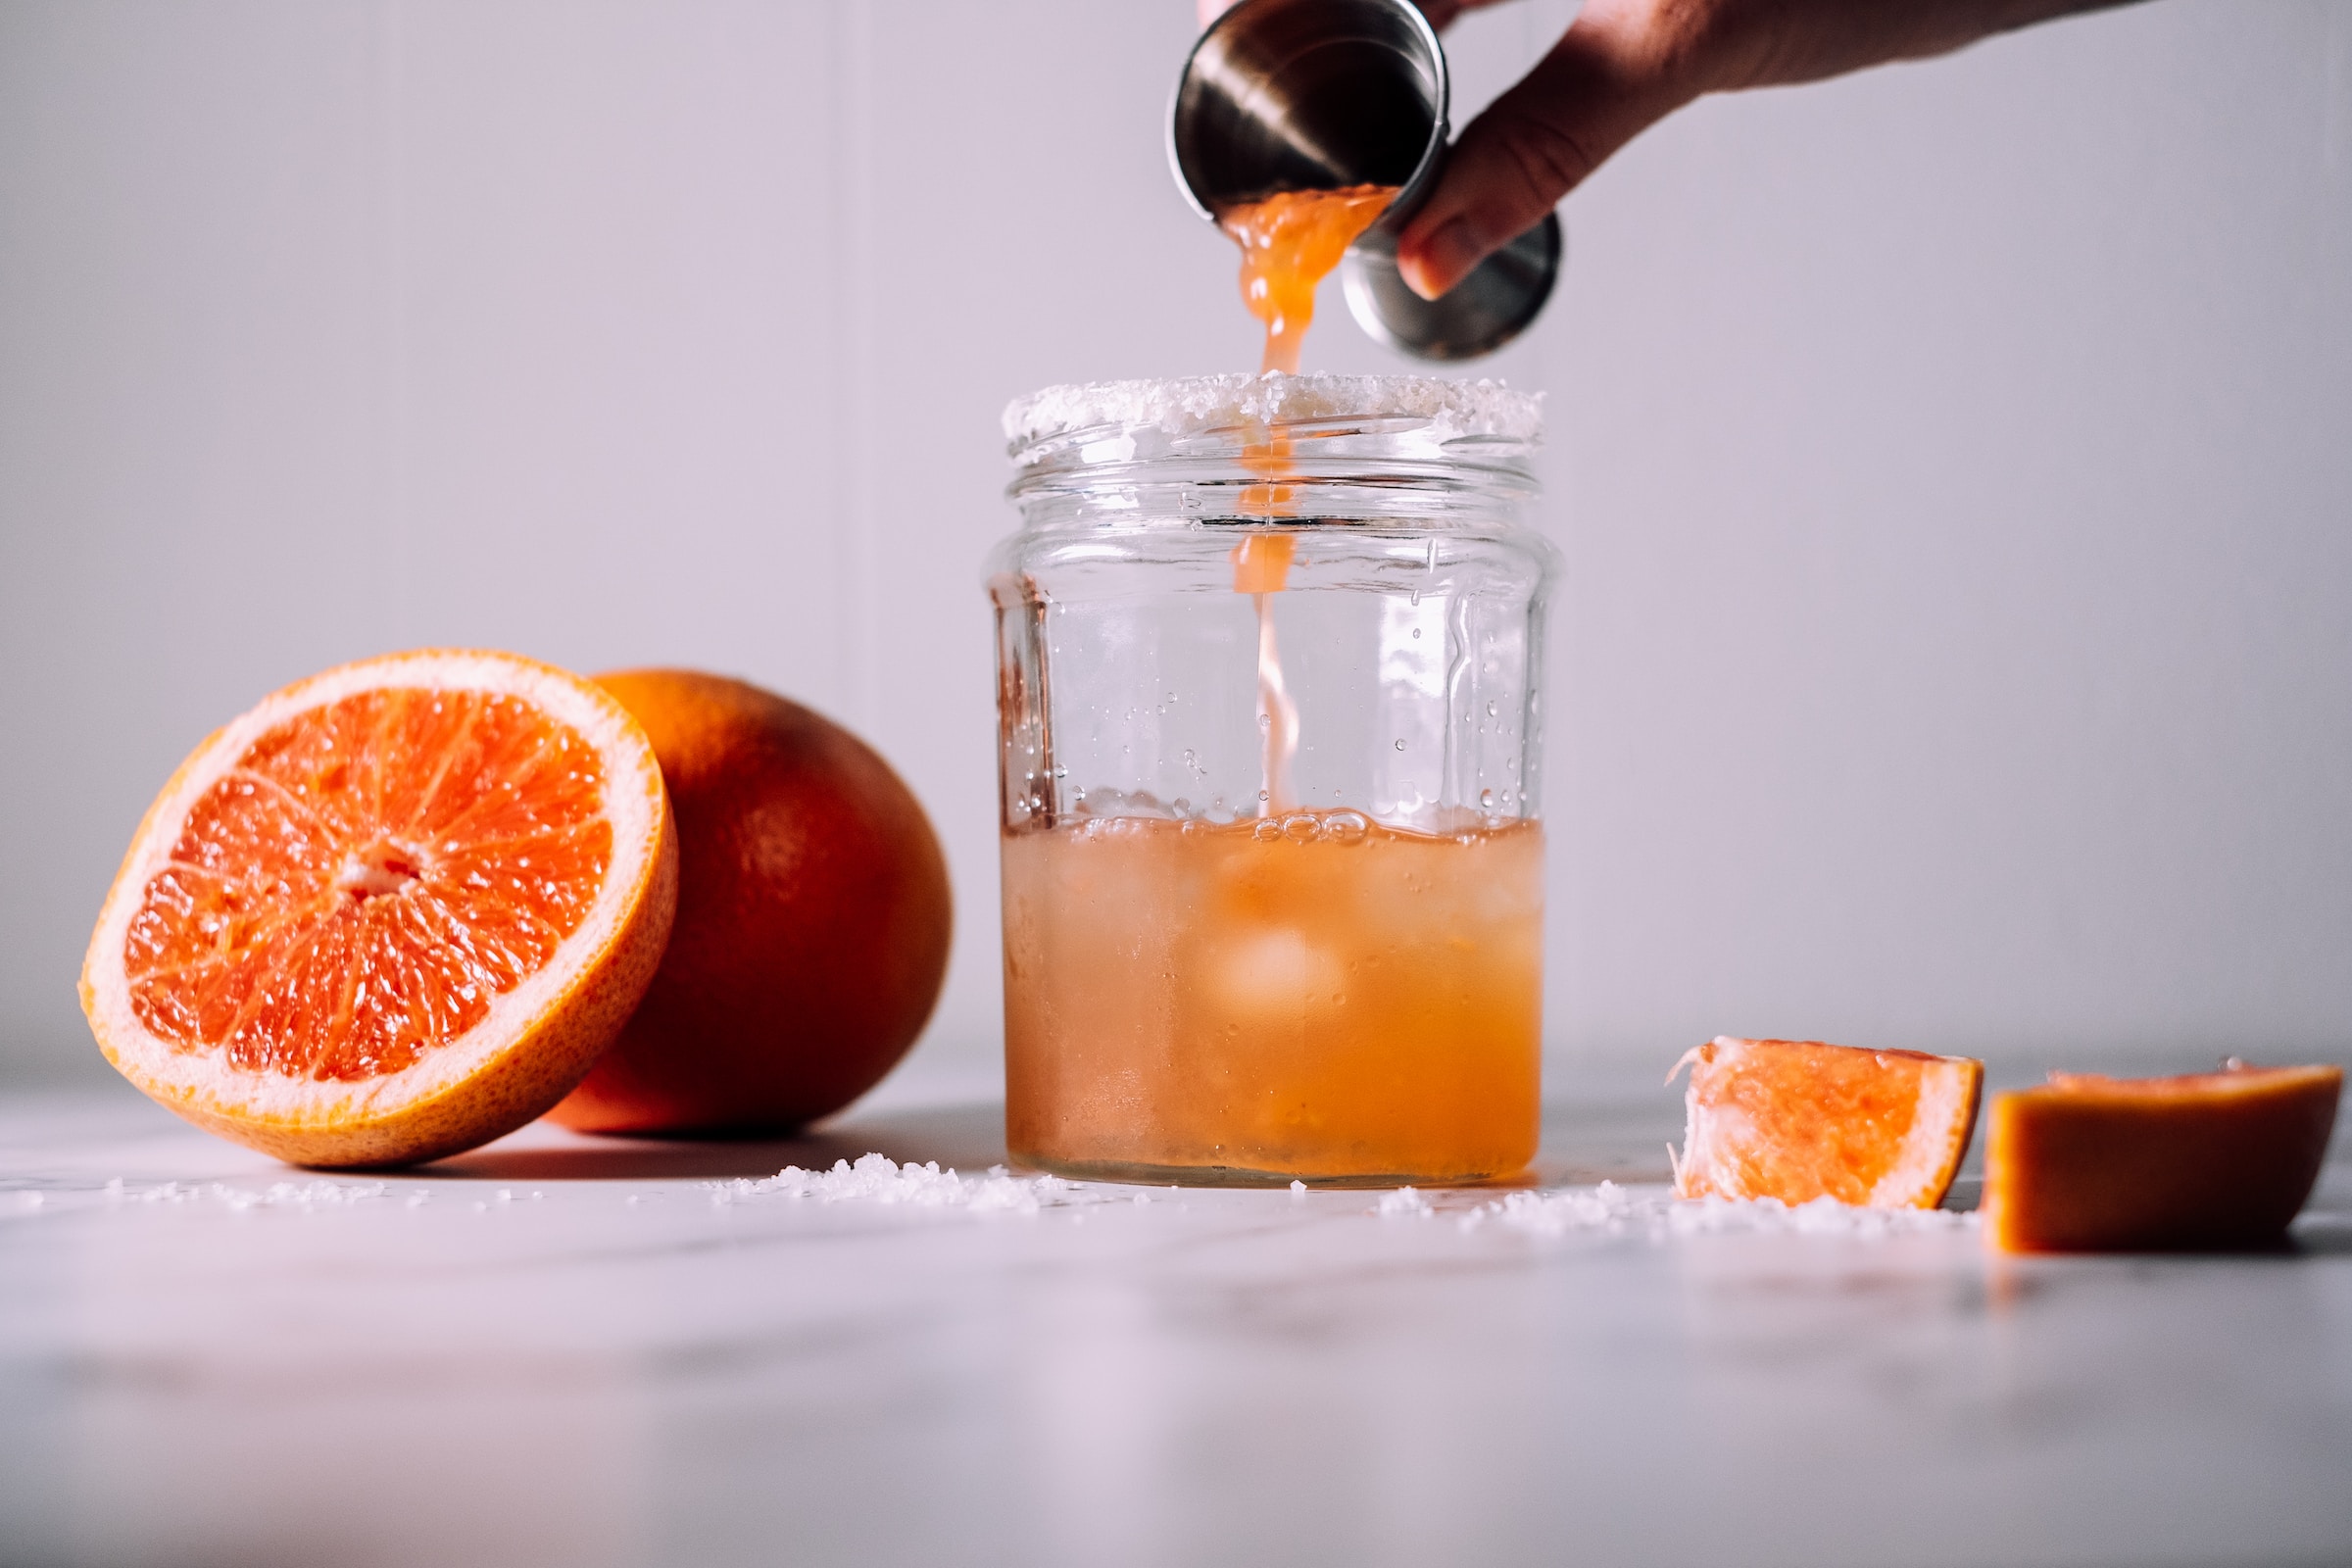 An image of someone pouring a jigger of grapefruit juice into a salt-rimmed glass to make a Salty Dog cocktail, surrounded by grapefruit slices